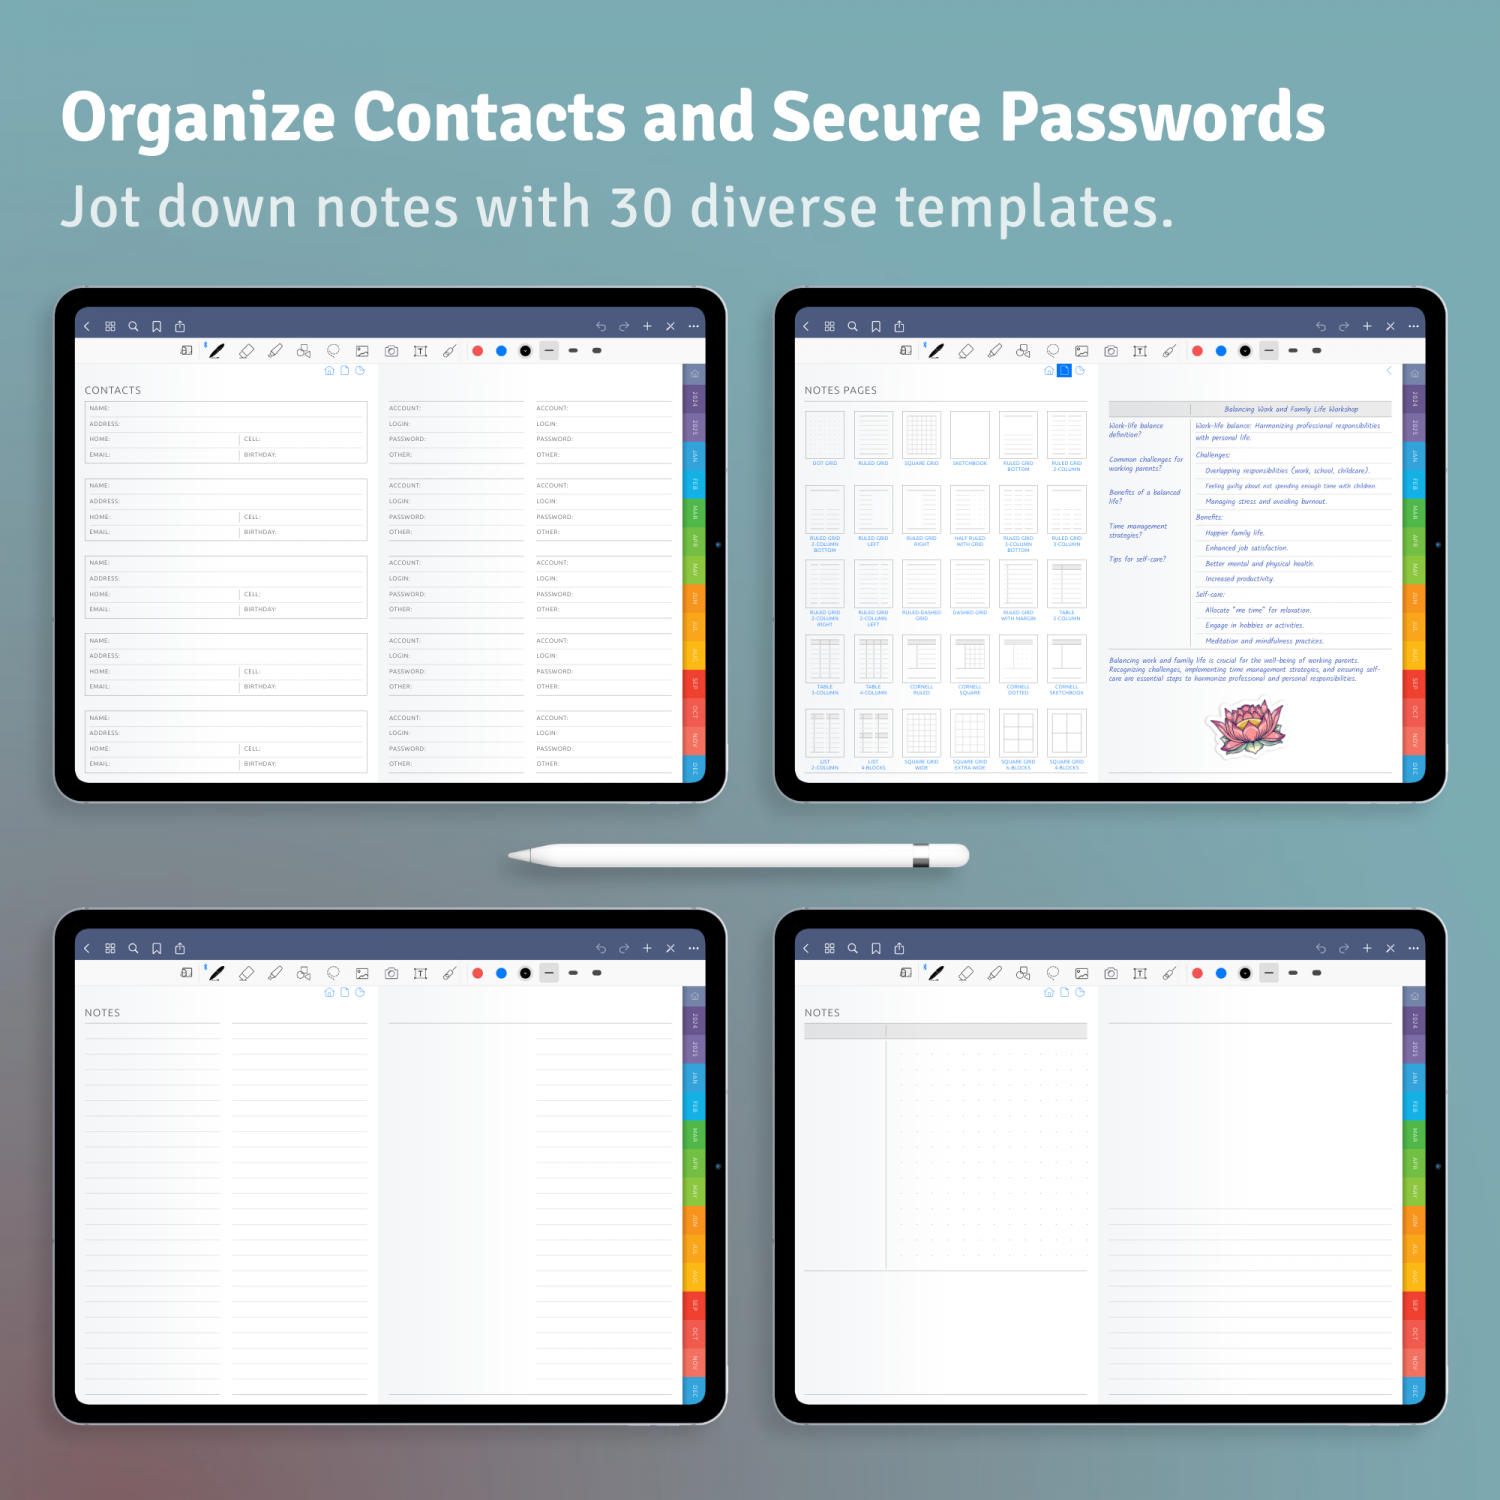 contact, password, and note templates